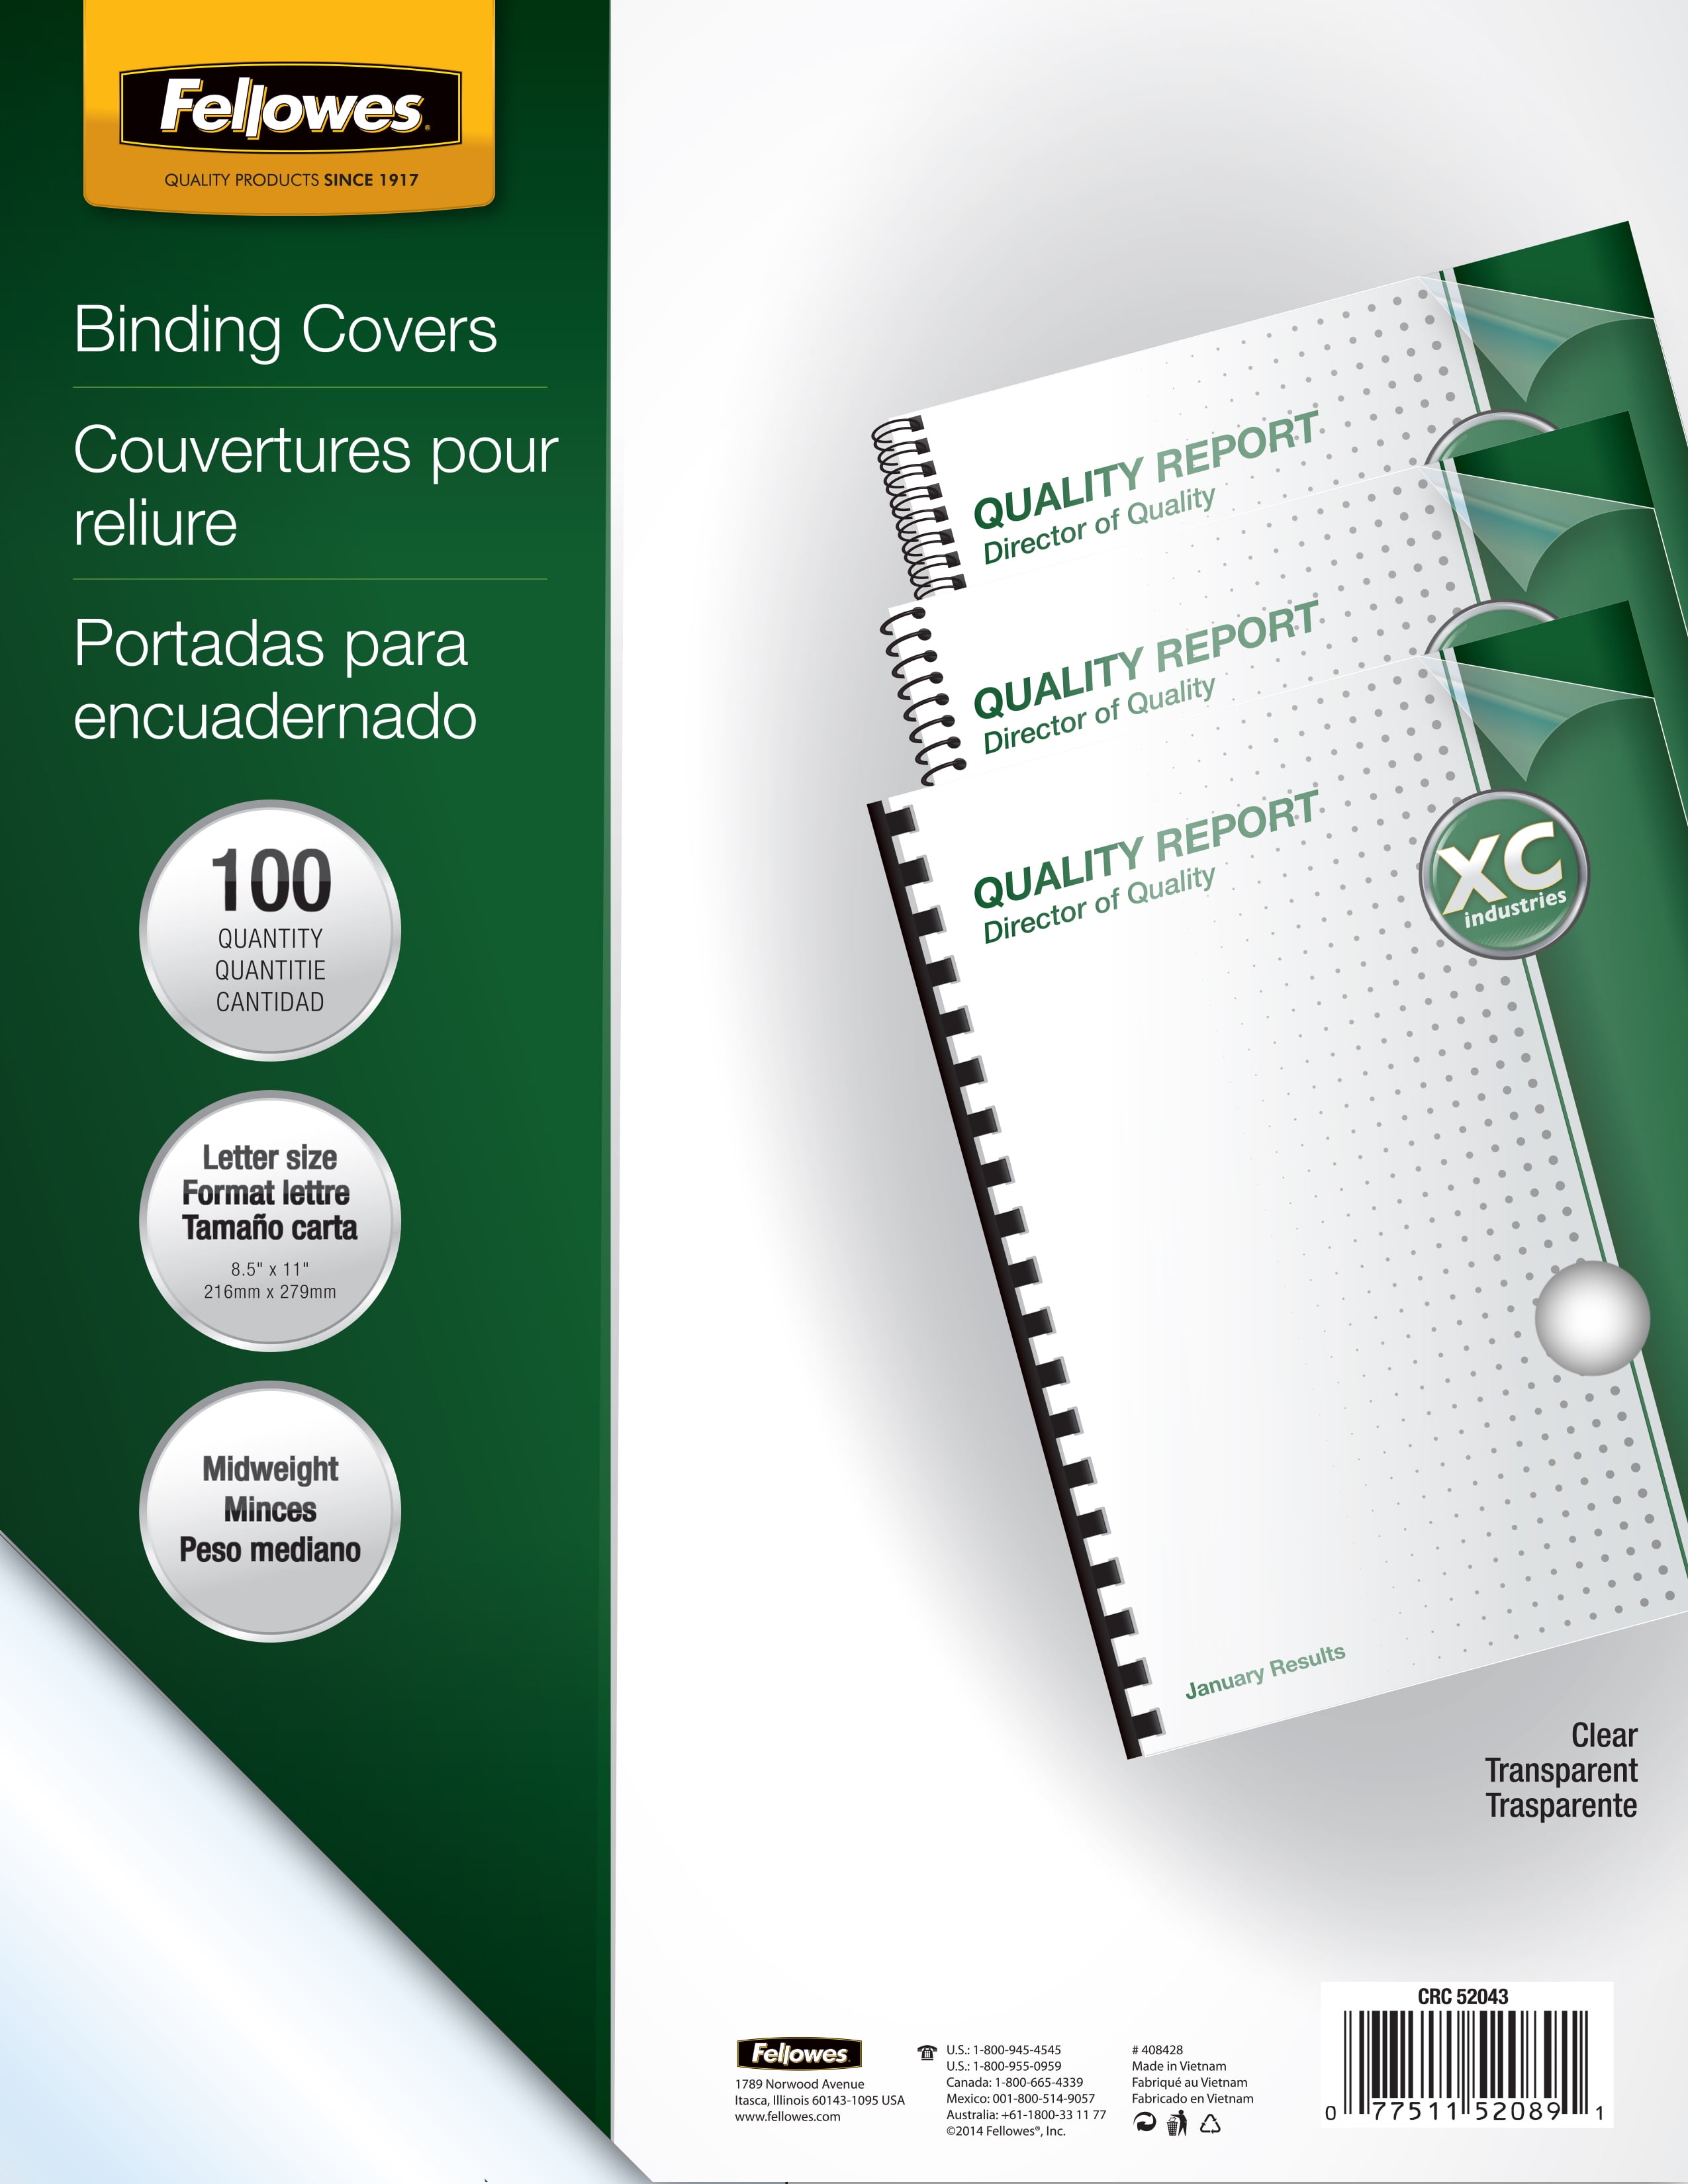 Binder Systems - Binder Covers & Binding Comb Cover